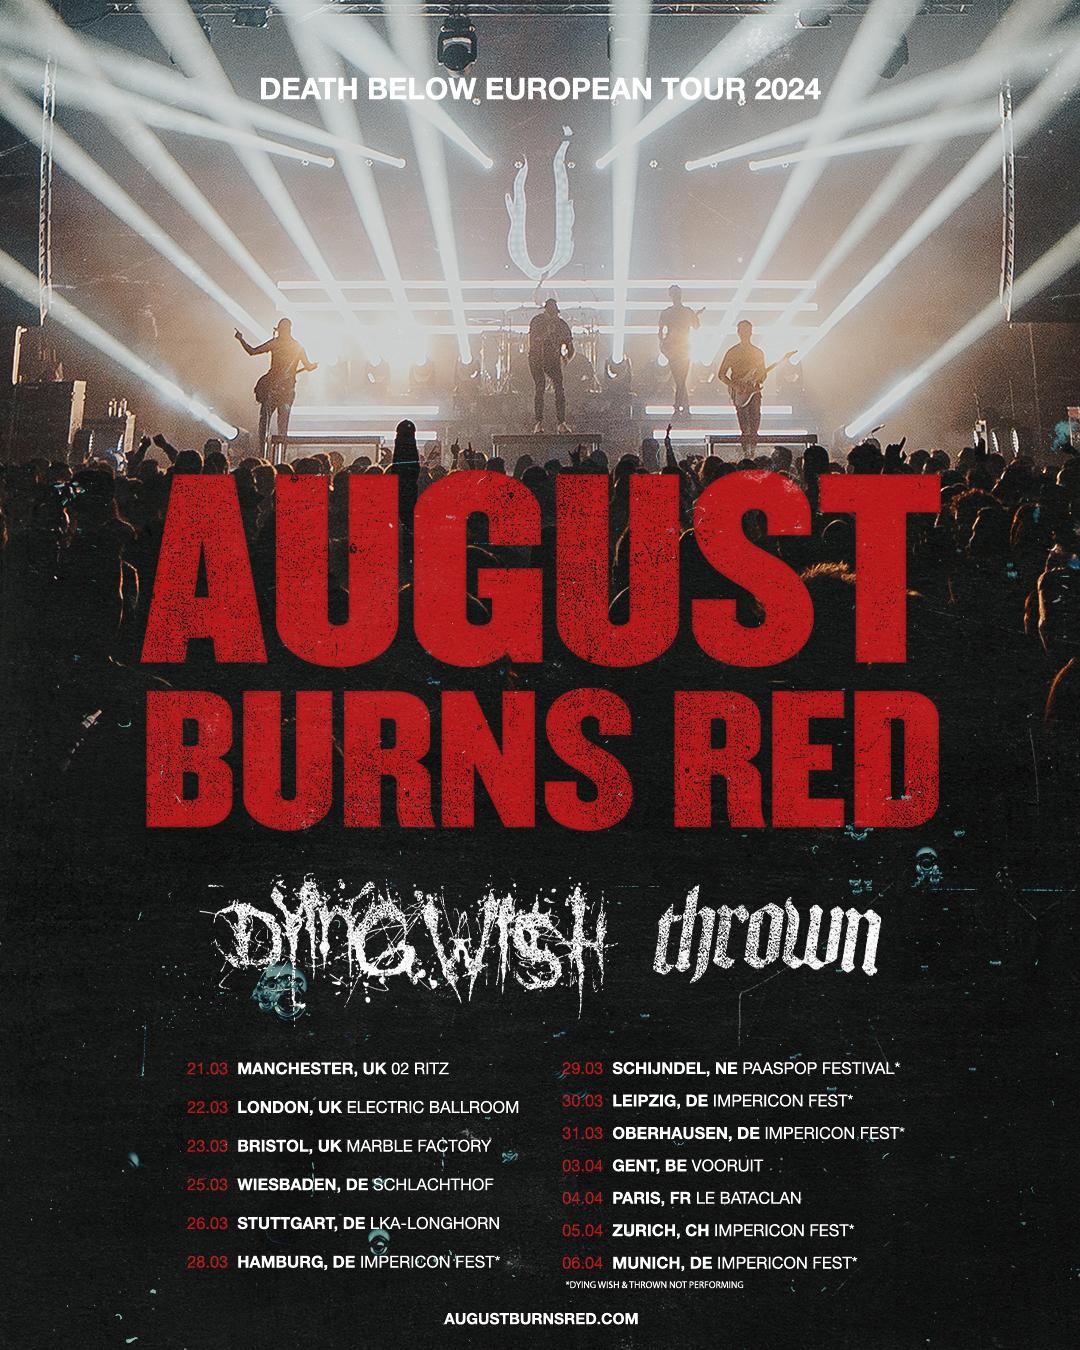 August burns red tour 2024